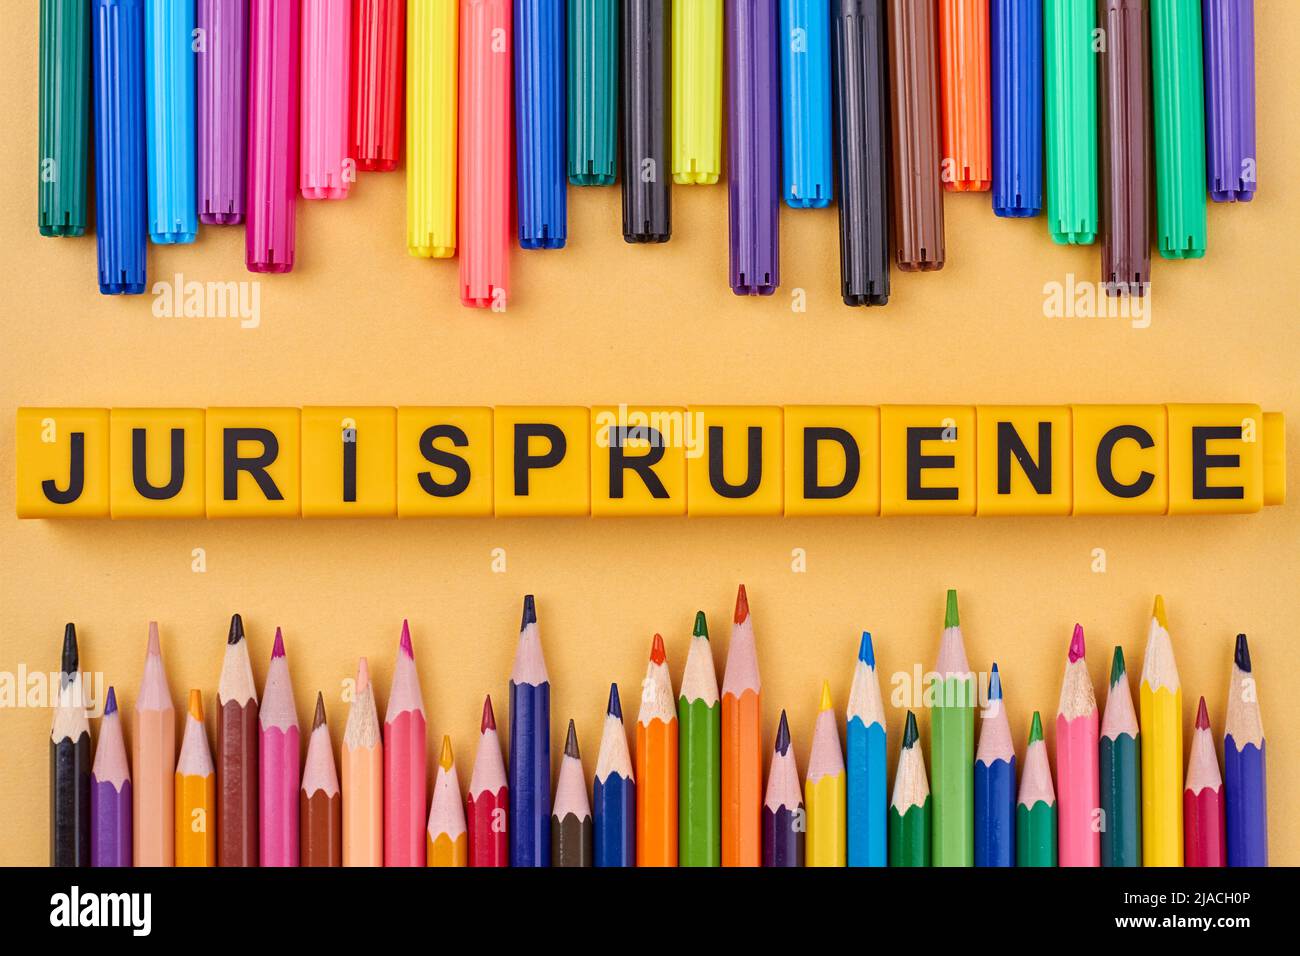 Jurisprudence inscription made from colorful cubes on yellow background. Flat lay composition from colorful pencils. Stock Photo